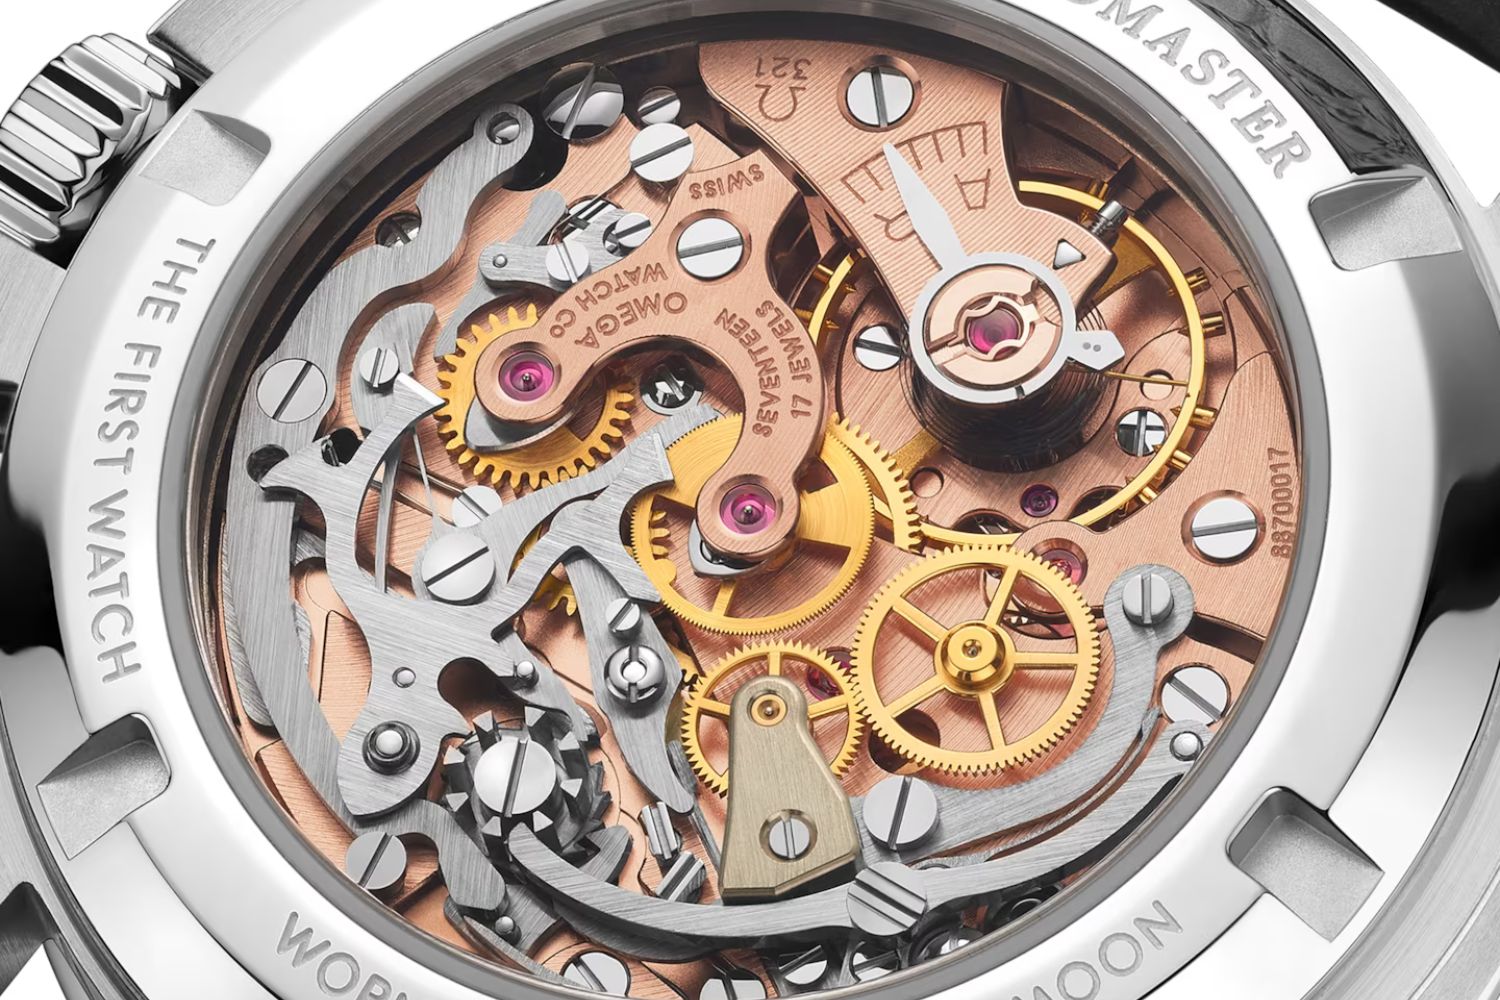 OMEGA's Laboratoire De Précision Could Set The New Standard In Swiss Chronography